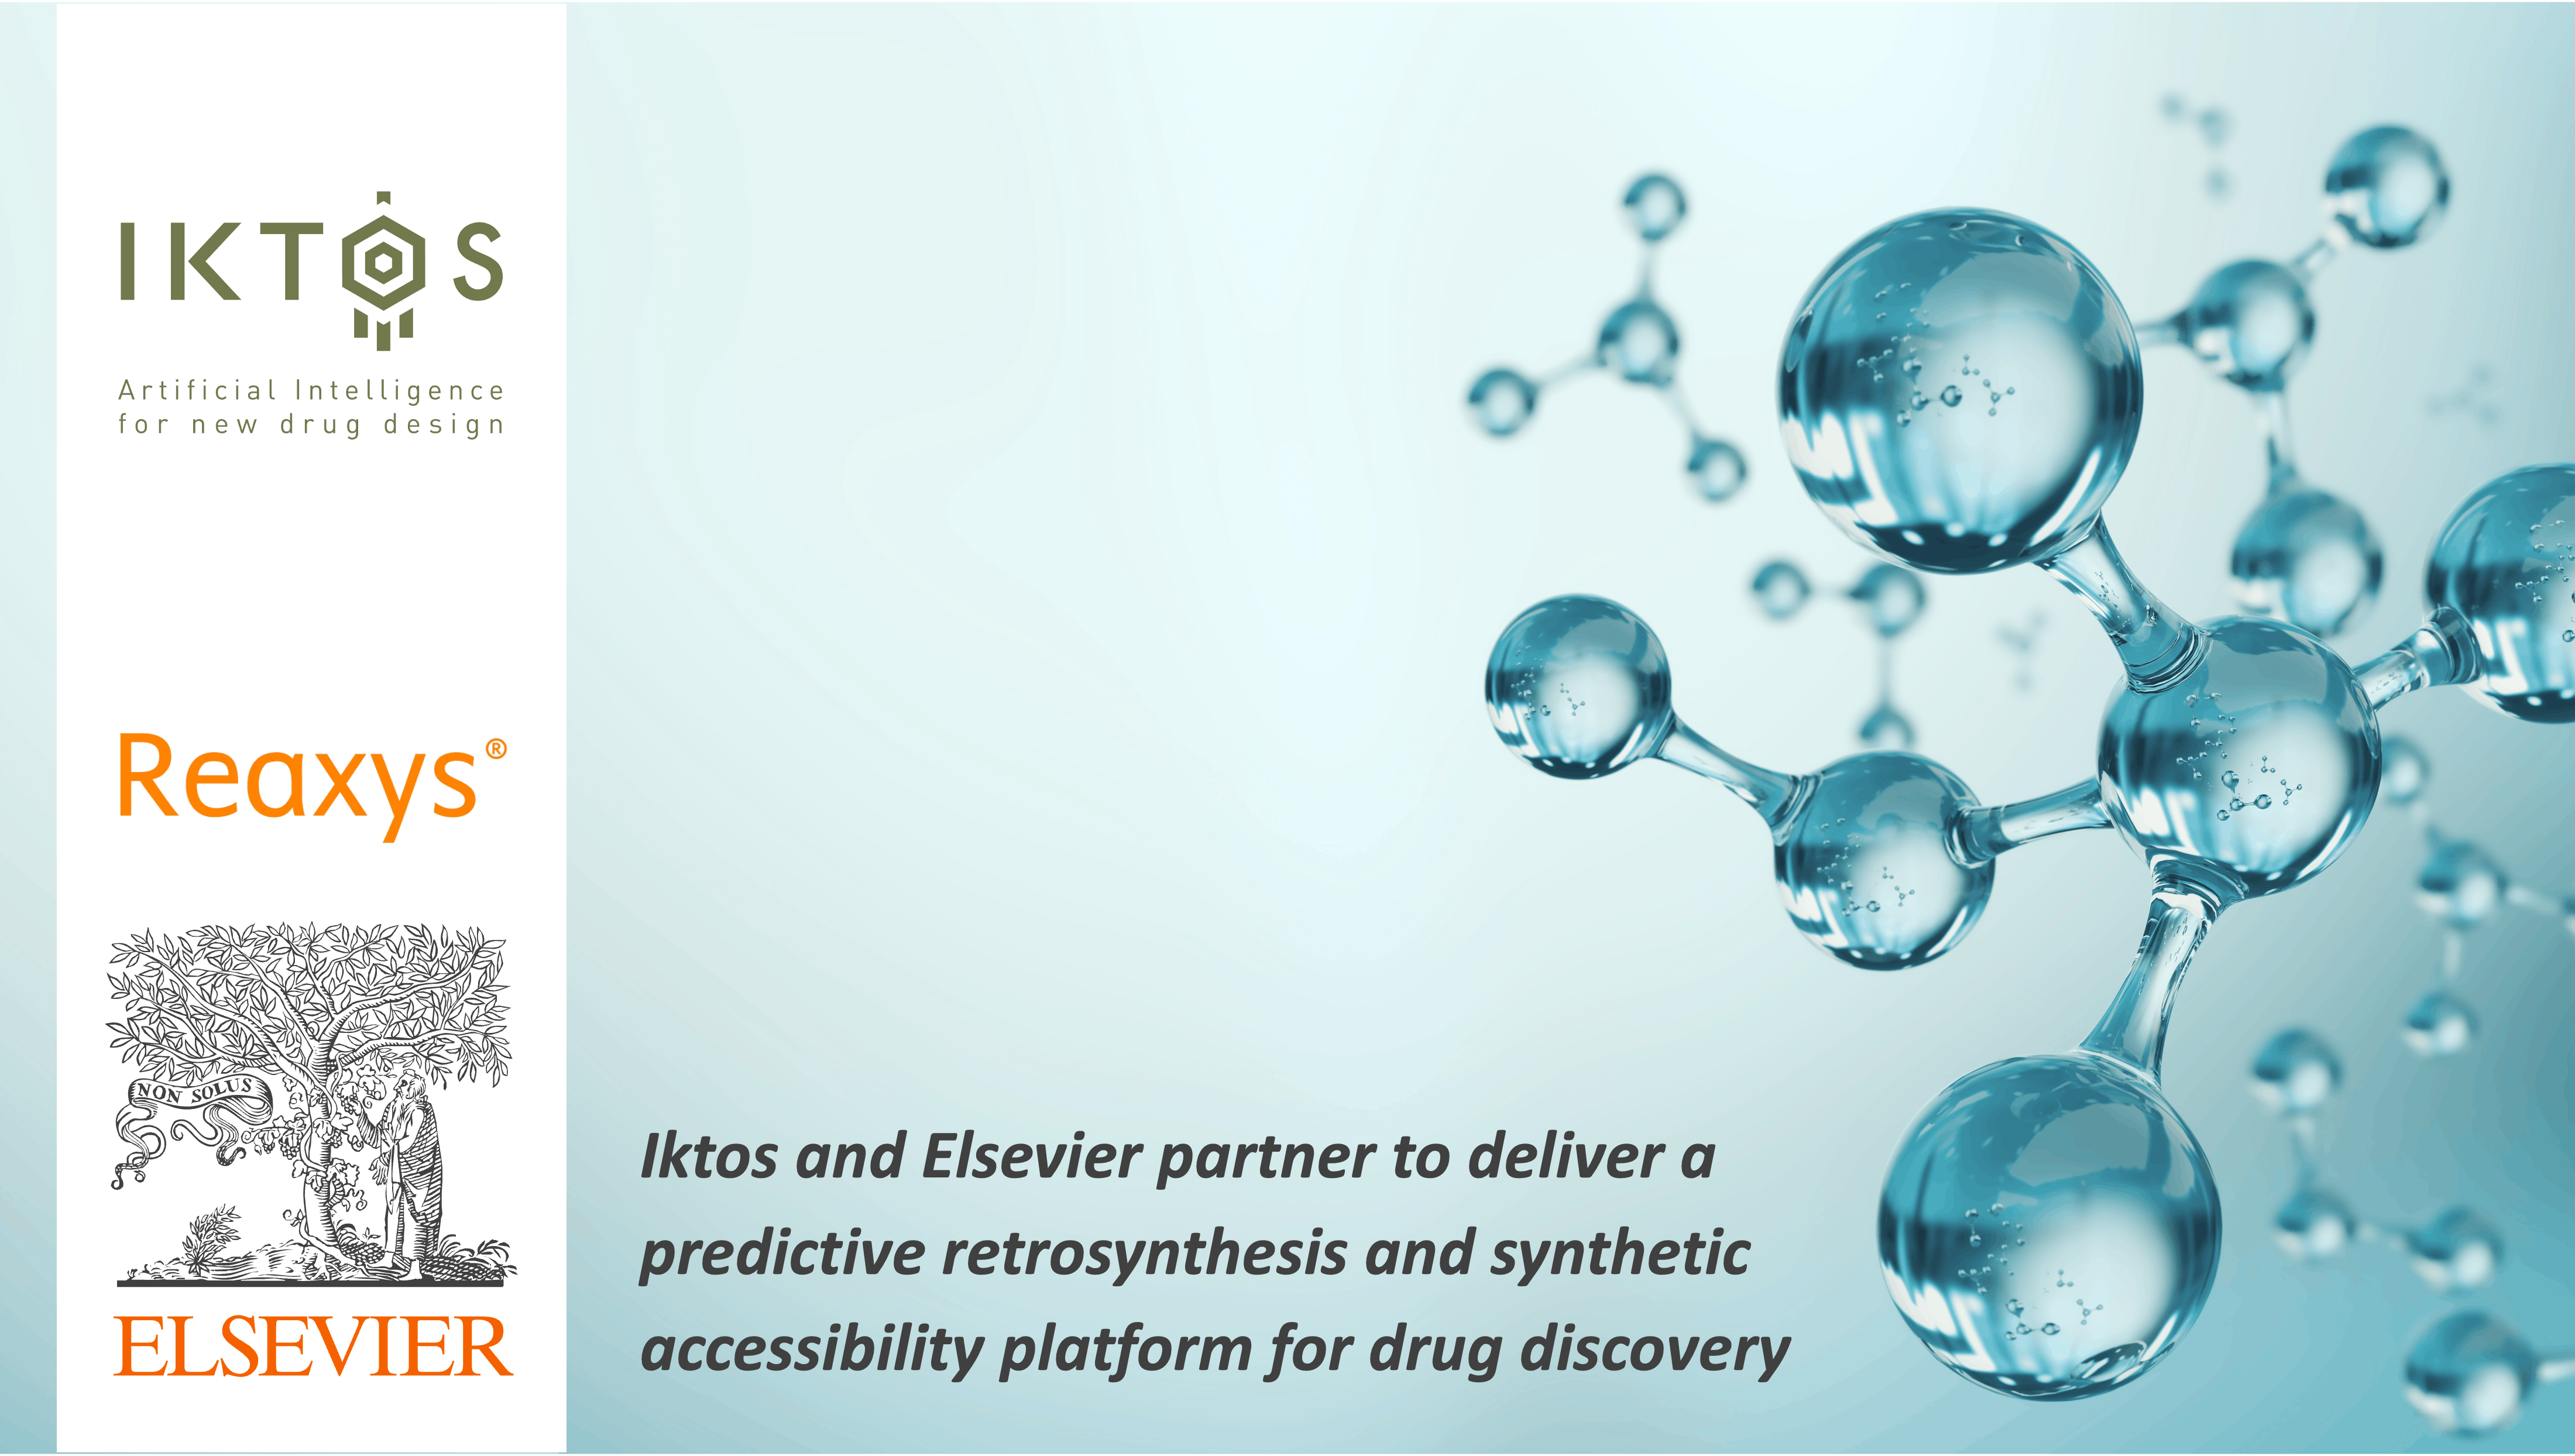 Iktos and Elsevier announce their partnership